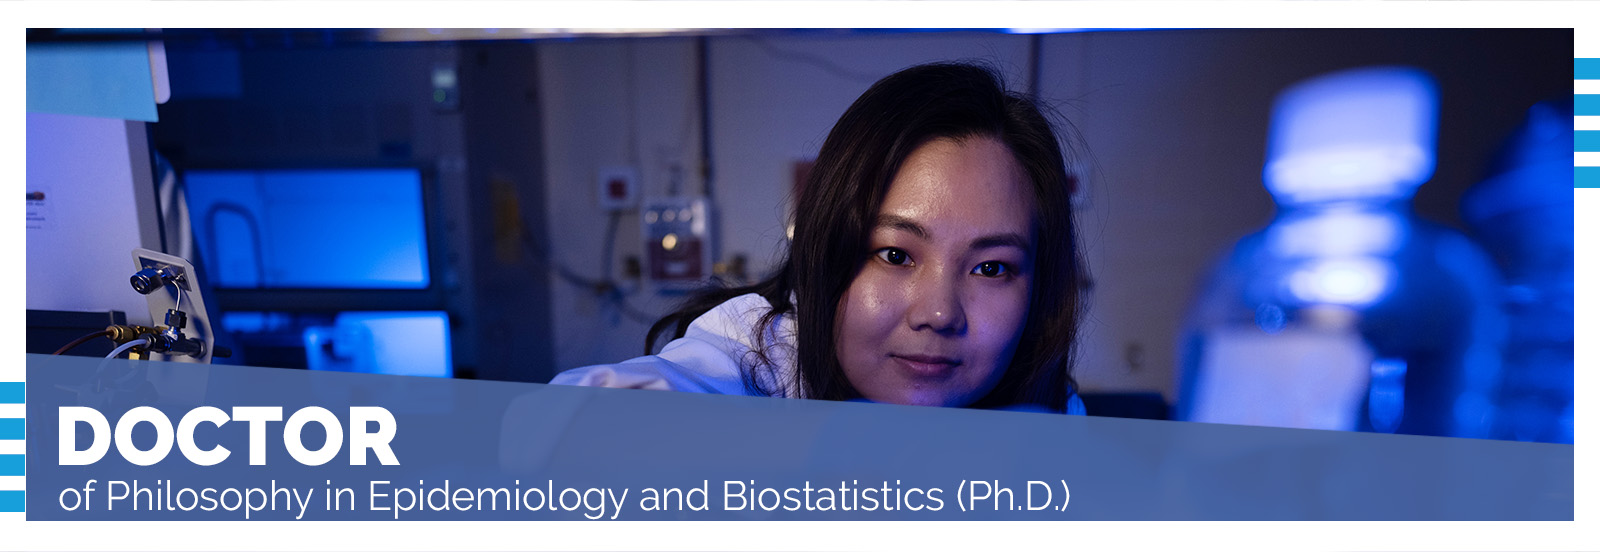 Student in Lab: Doctor of Philosophy in Epidemiology and Biostatistics (Ph.D.)